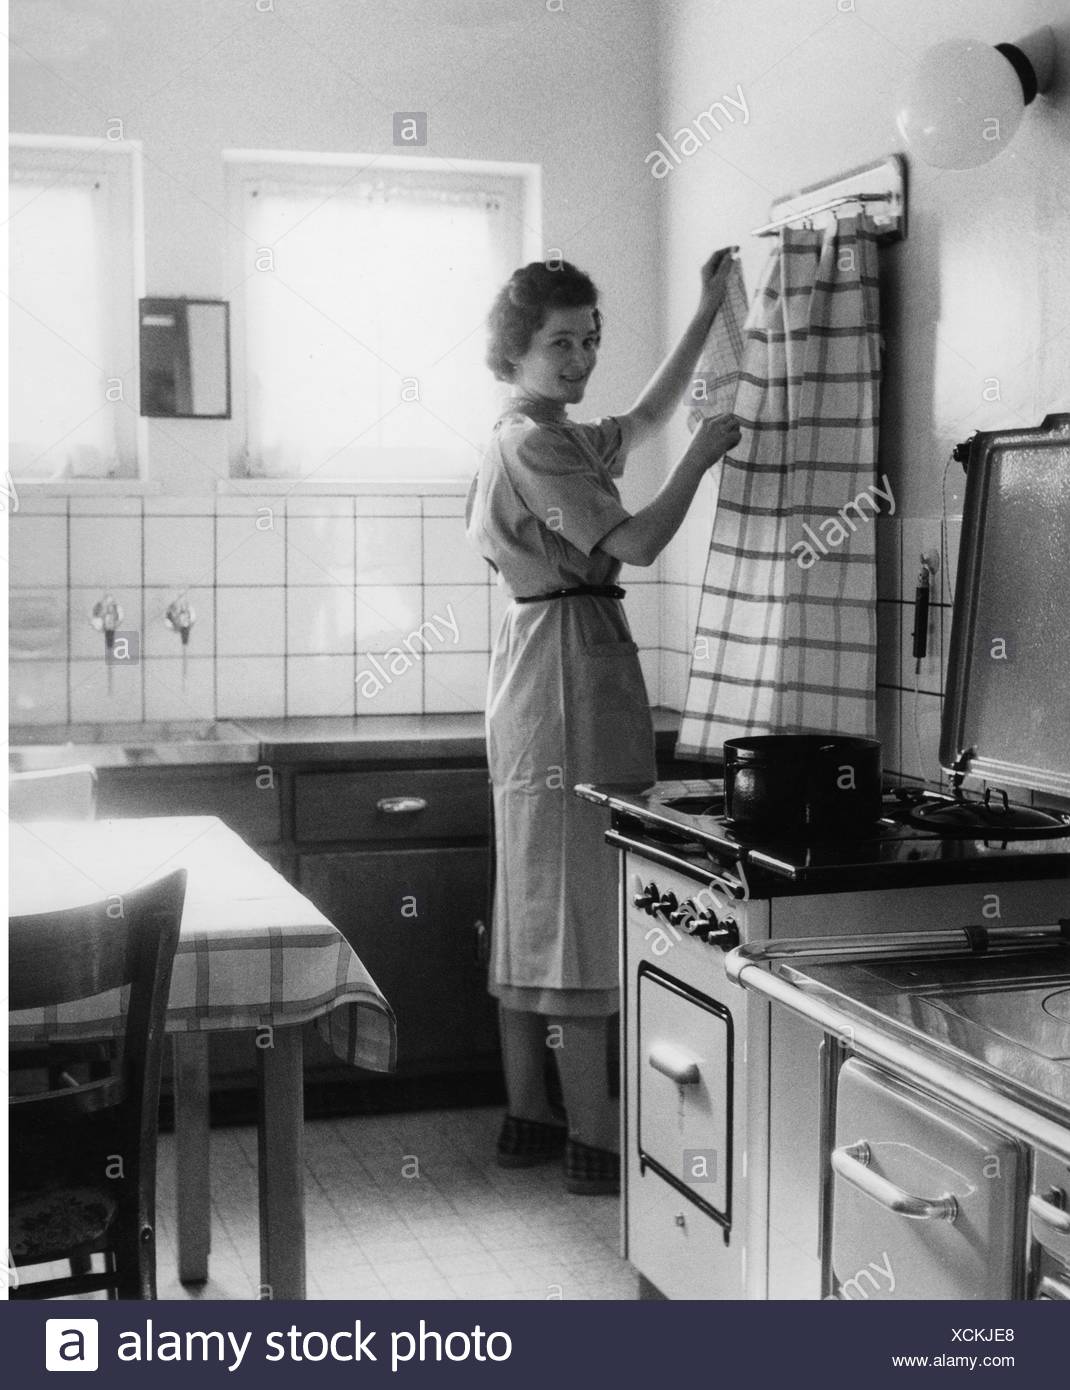 Woman In Kitchen 1950s High Resolution Stock Photography and Images - Alamy